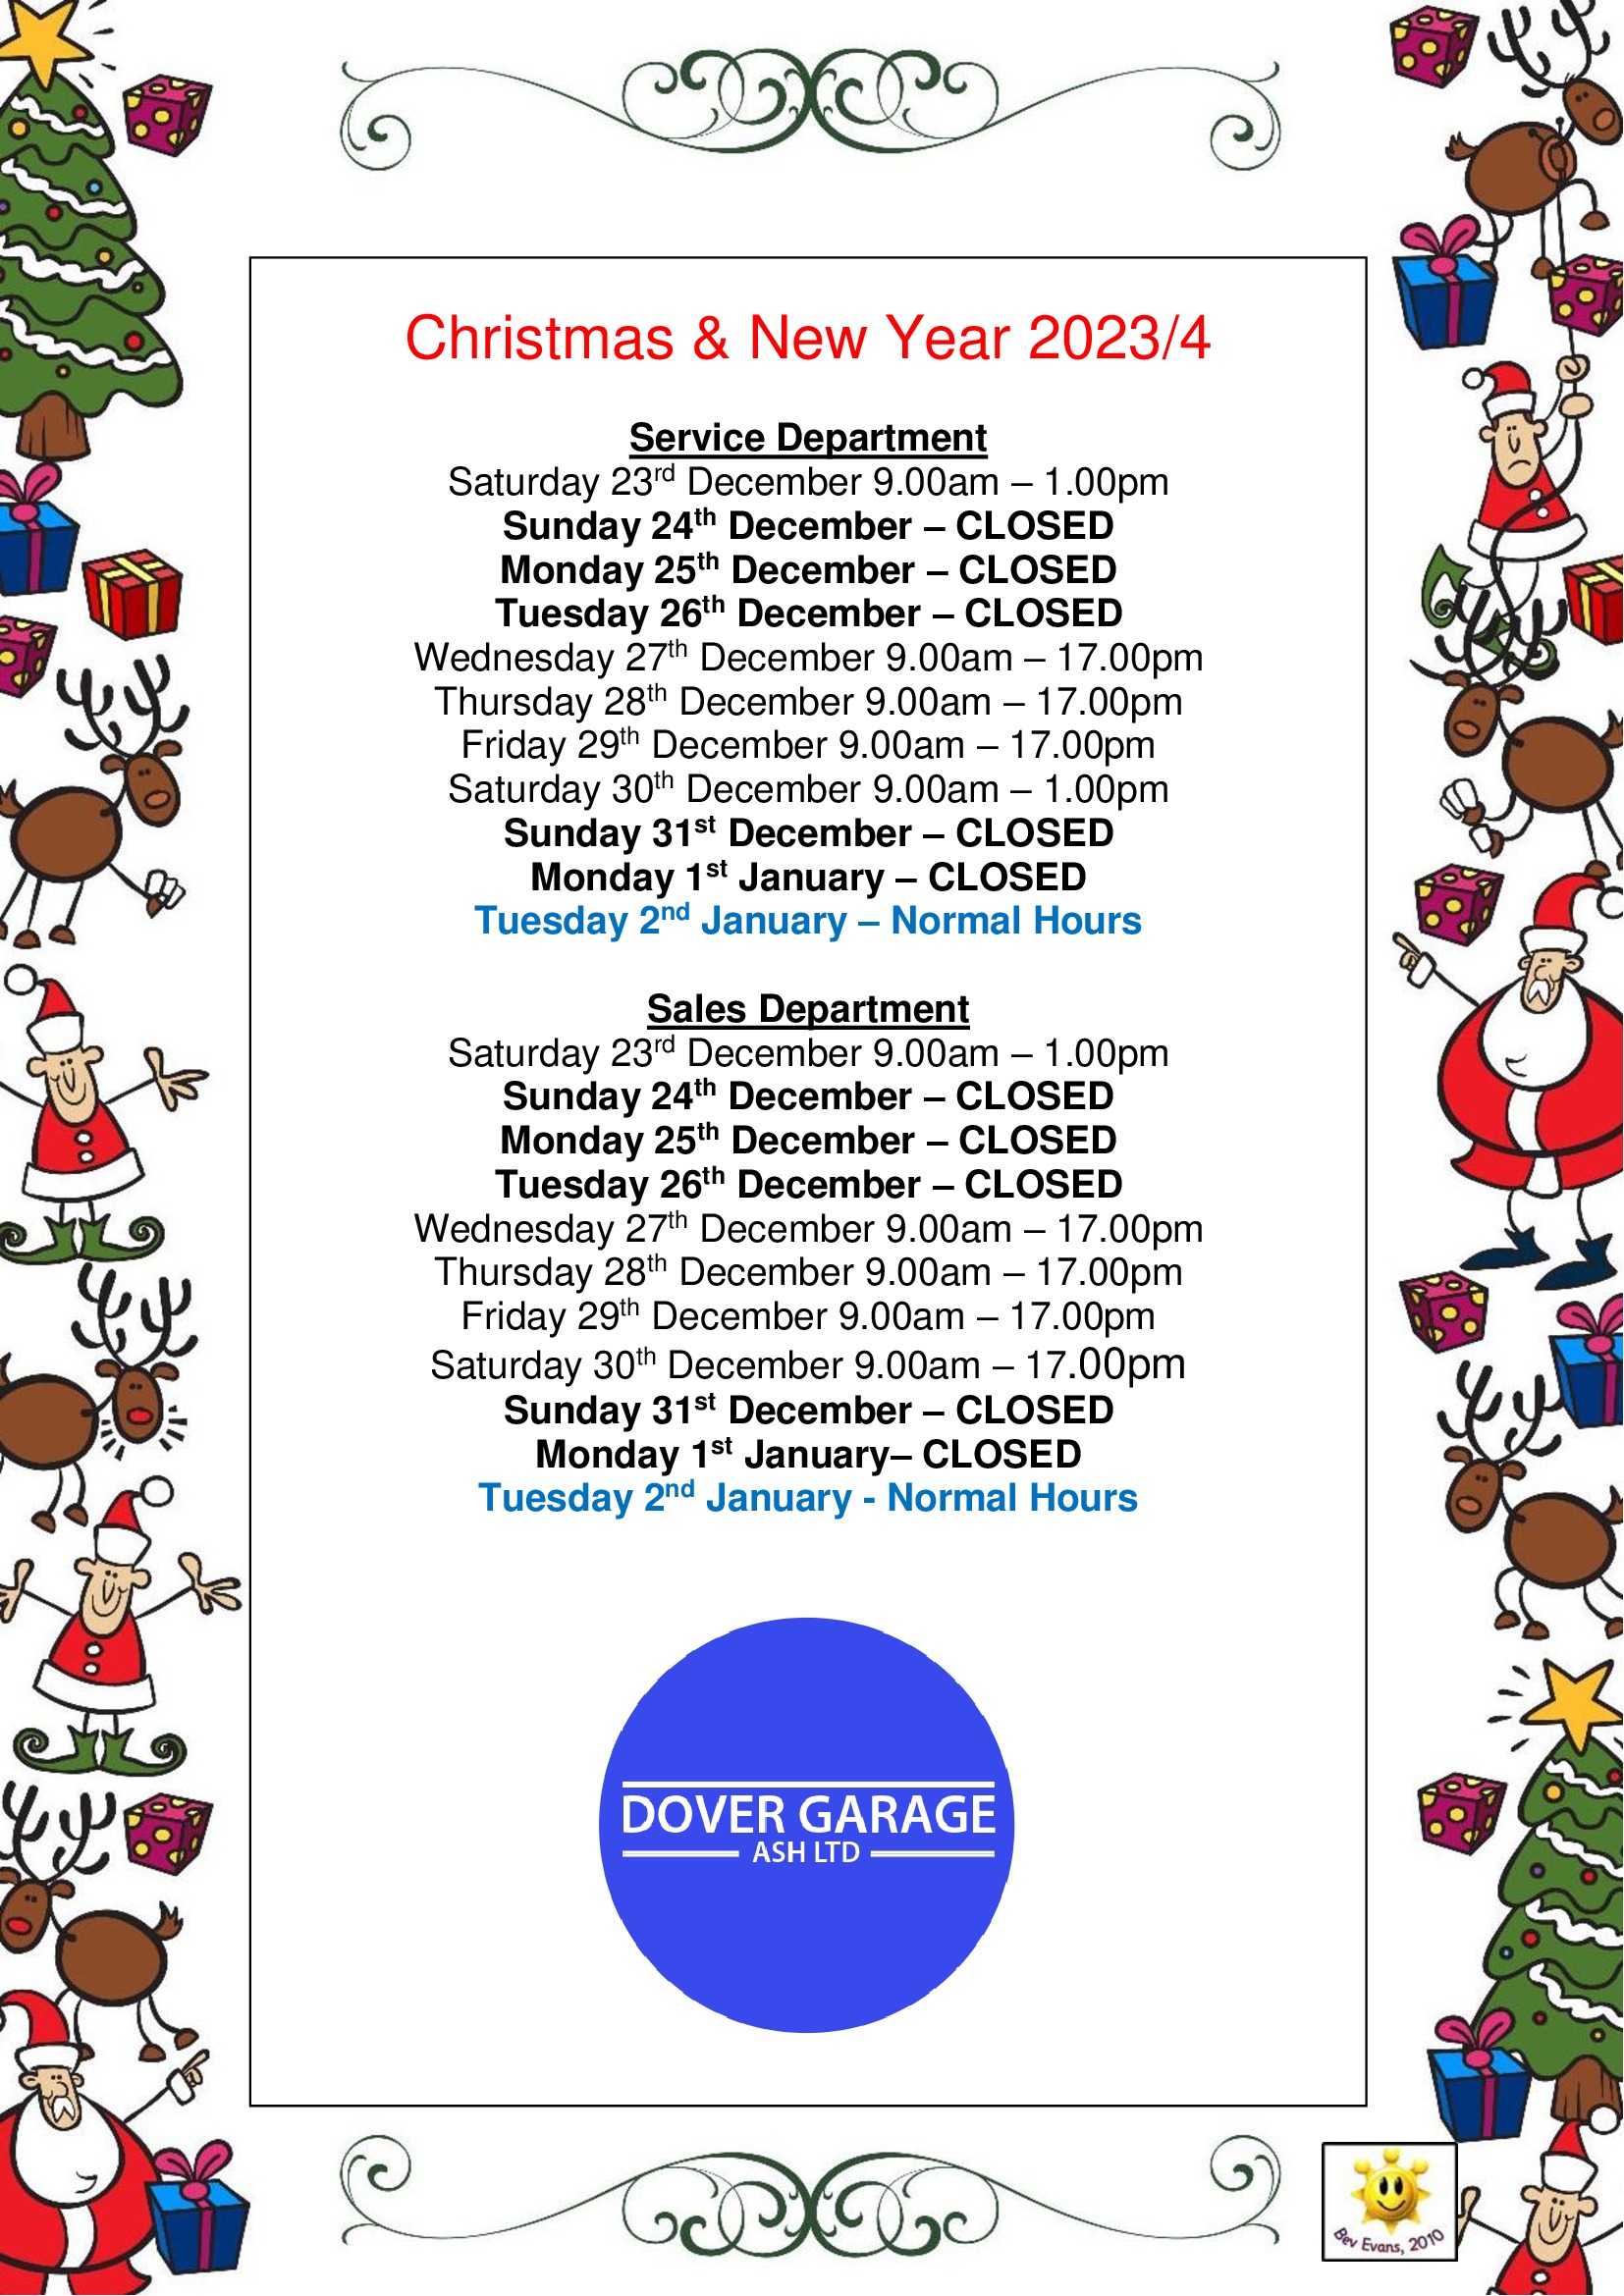 Christmas & New Year Opening Hours 2023/24